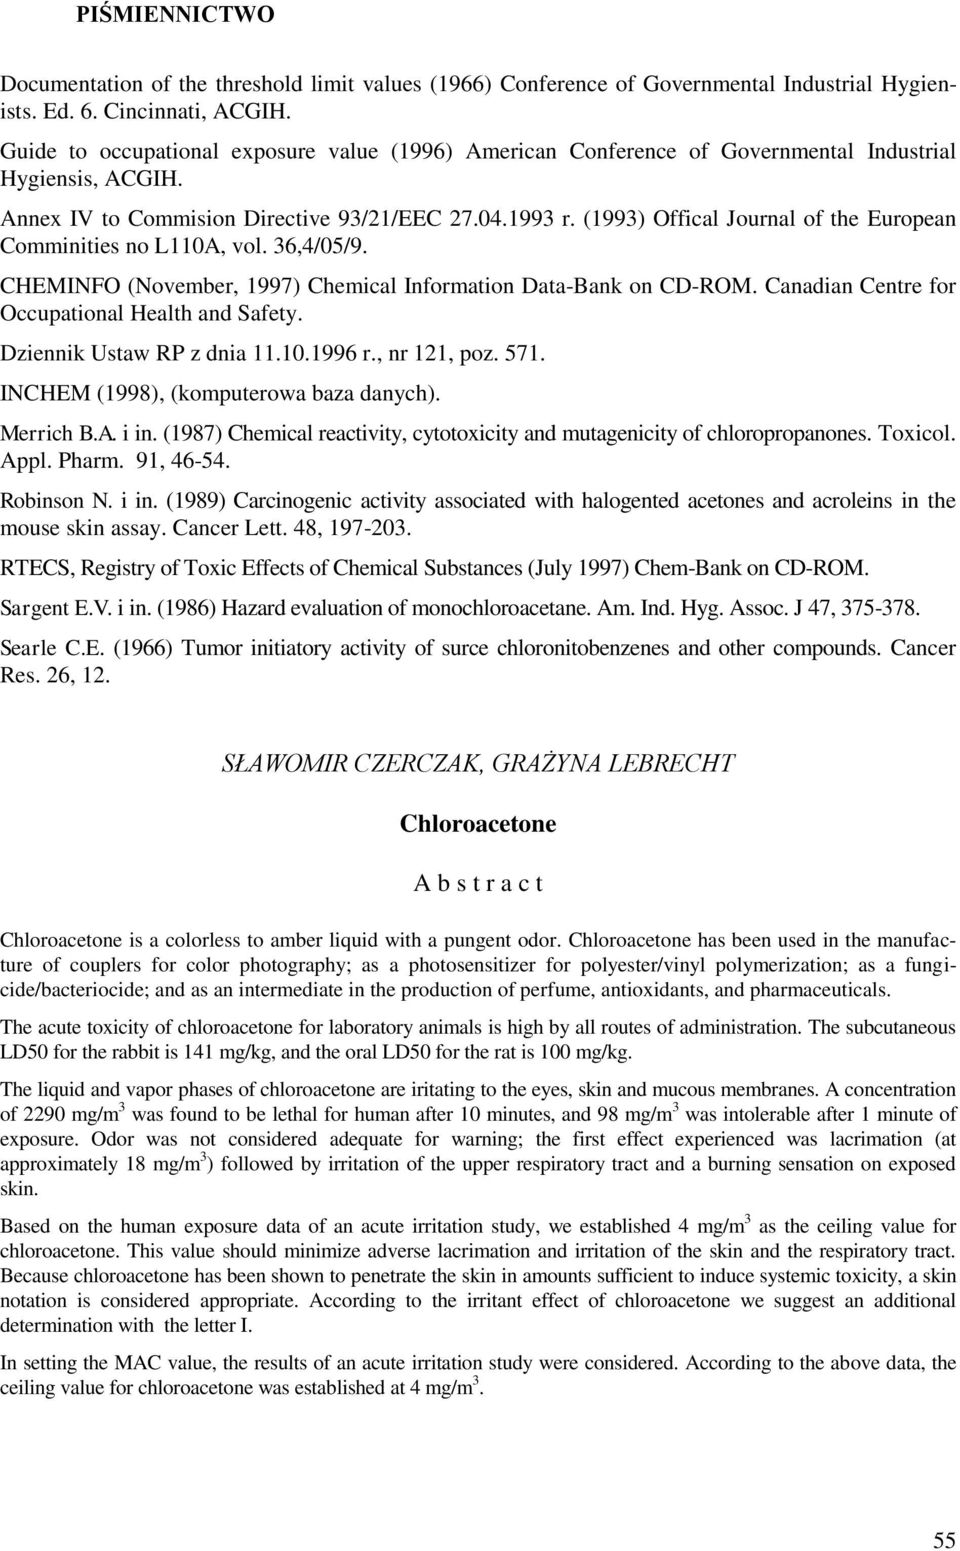 (1993) Offical Journal of the European Comminities no L110A, vol. 36,4/05/9. CHEMINFO (November, 1997) Chemical Information Data-Bank on CD-ROM. Canadian Centre for Occupational Health and Safety.